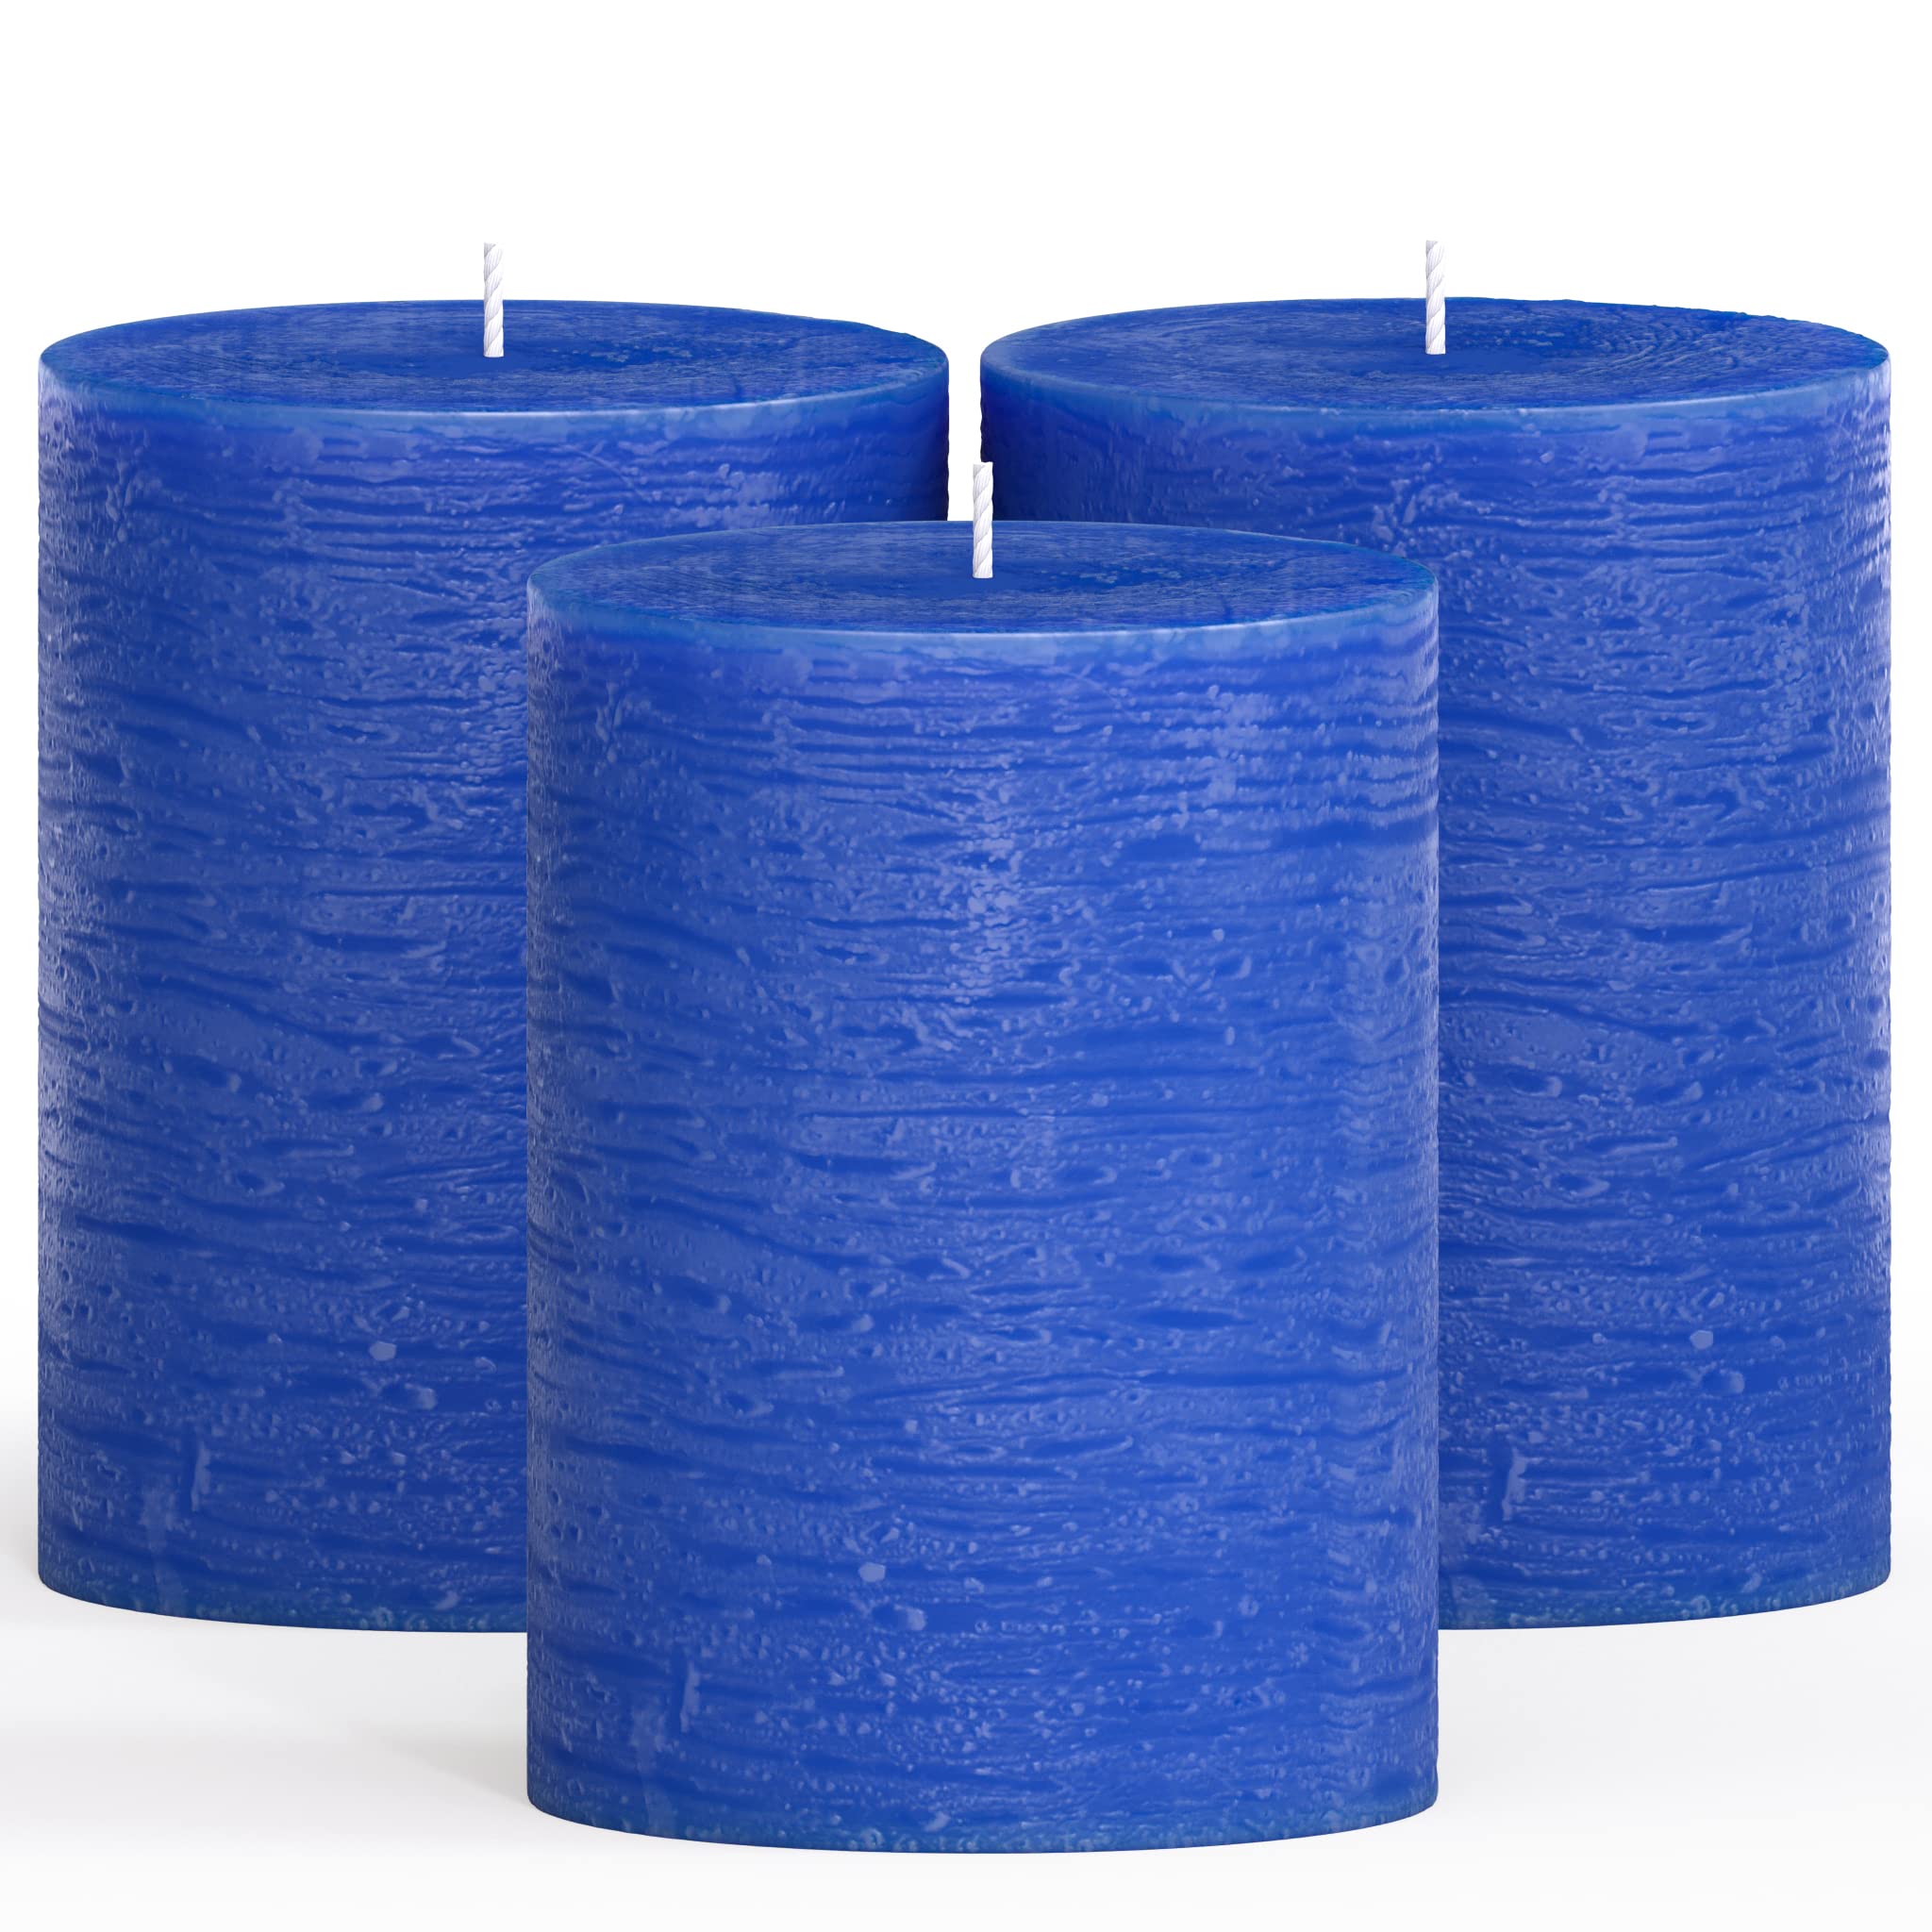 cANDWAX 3x4 Pillar candles Set of 3 - Decorative candles Unscented and No Drip candles - Ideal as Wedding candles or Large candl